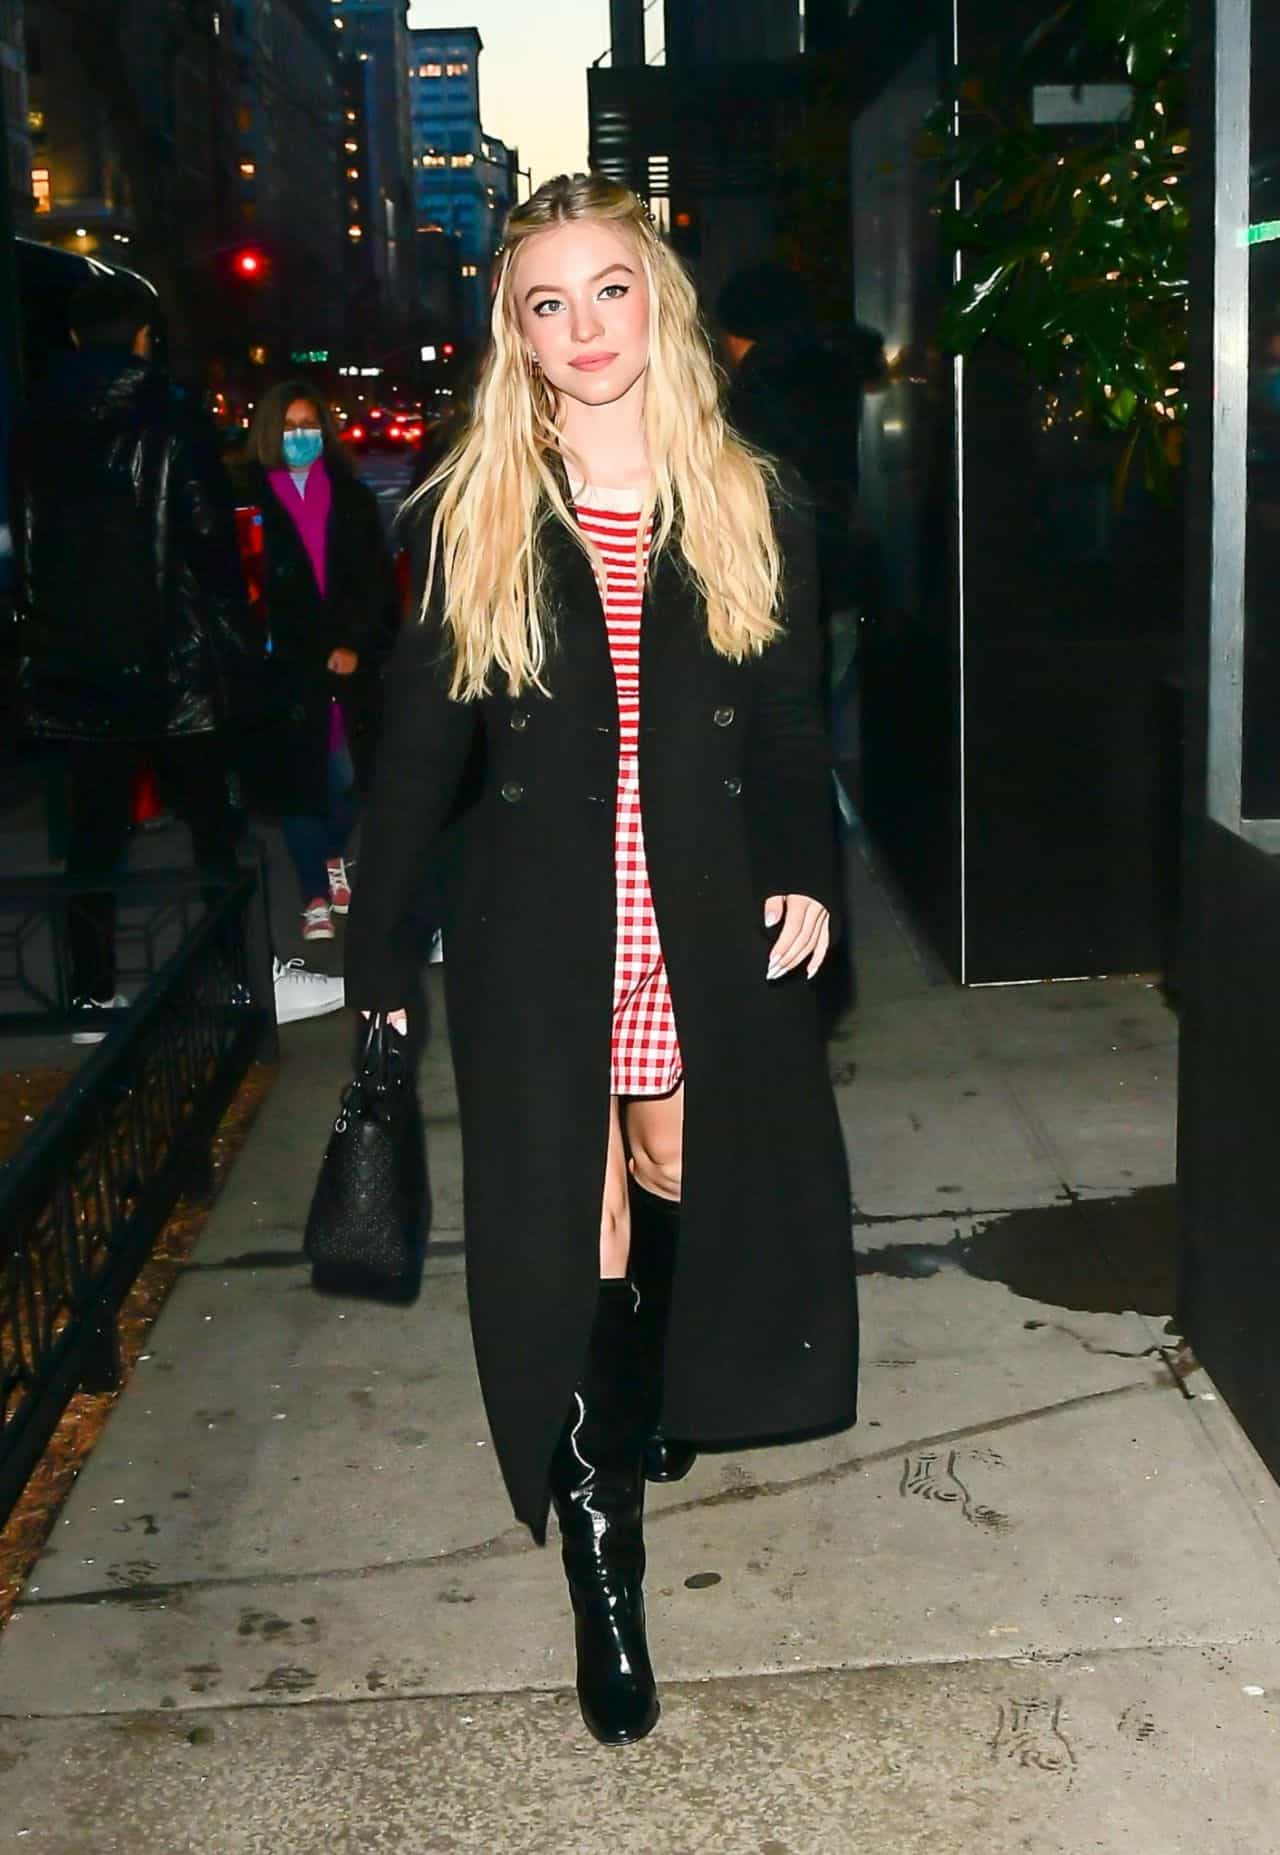 Sydney Sweeney Radiates Beauty in a Sweater and a Plaid Mini Skirt in NYC